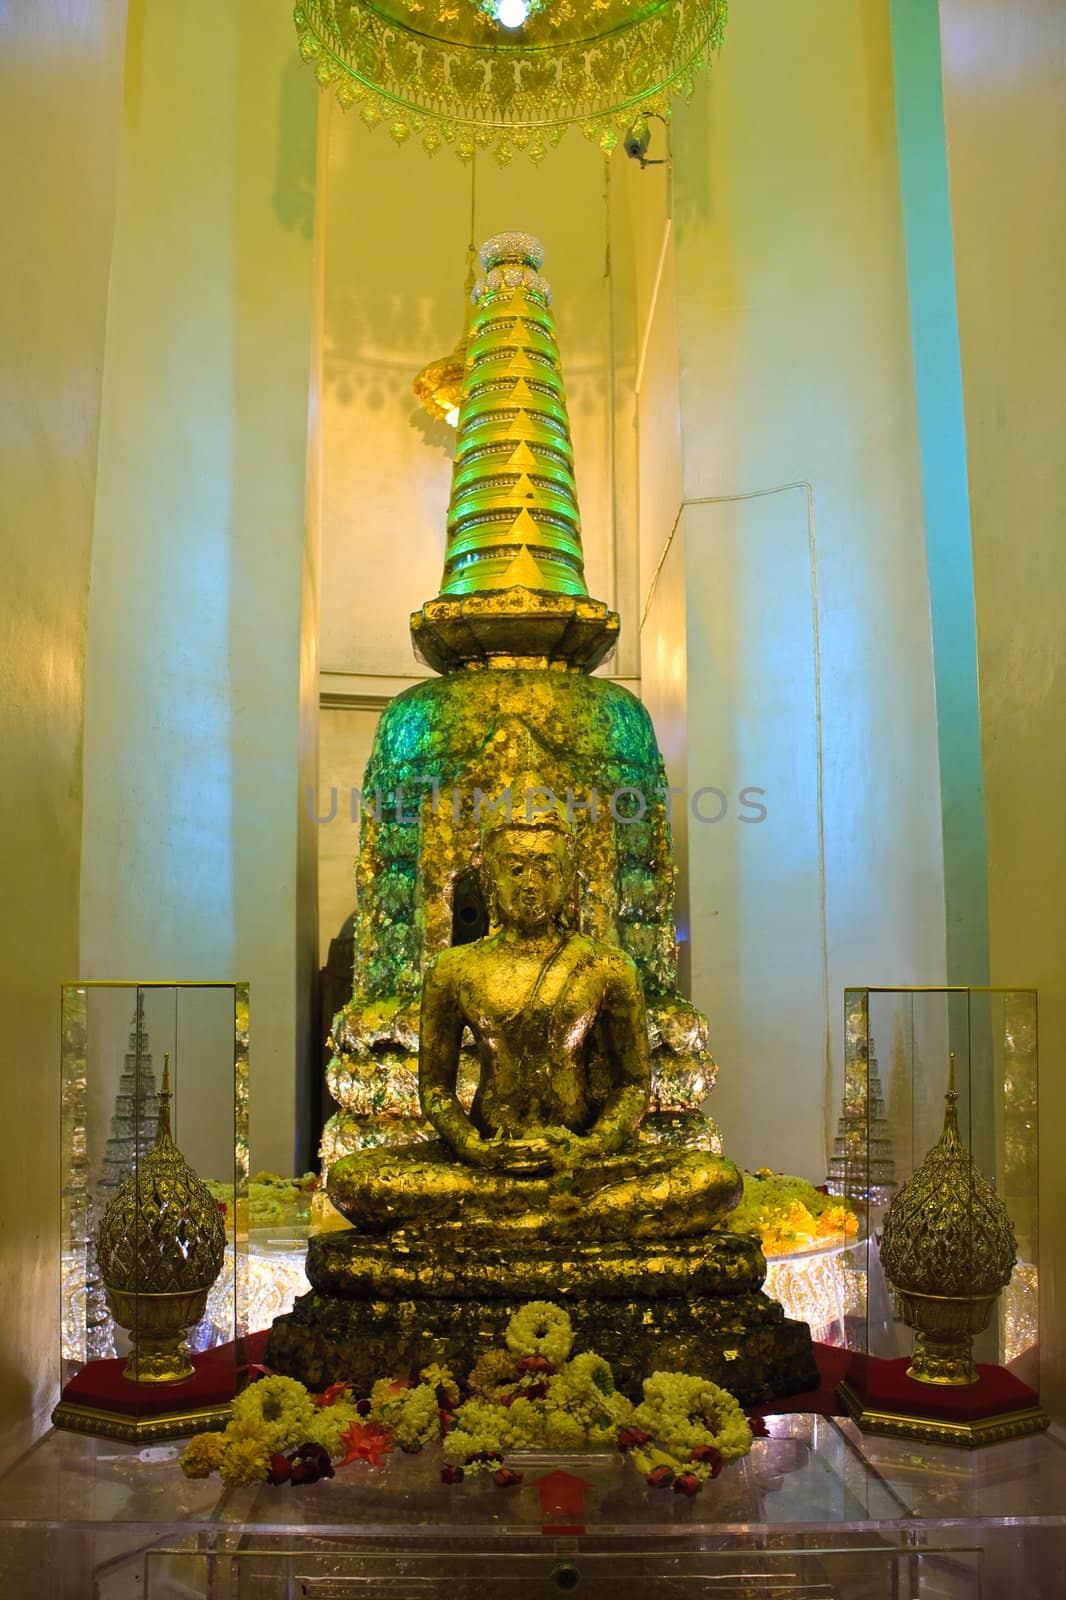 Image and relic of Golden Mountain temple in Bangkok, Thailand.